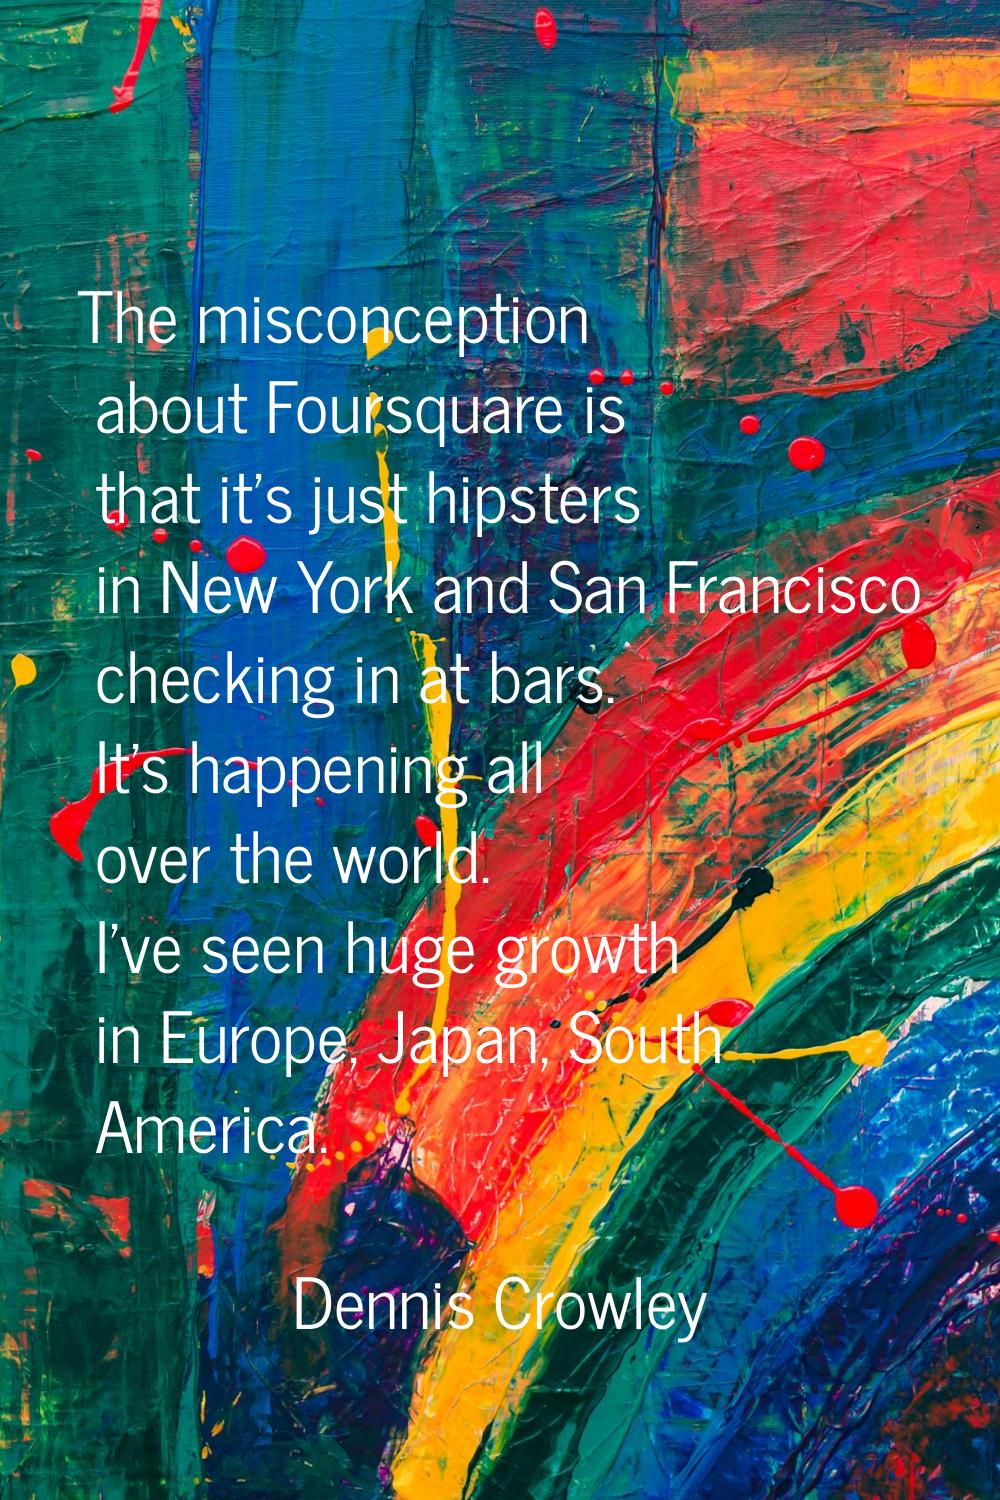 The misconception about Foursquare is that it's just hipsters in New York and San Francisco checkin